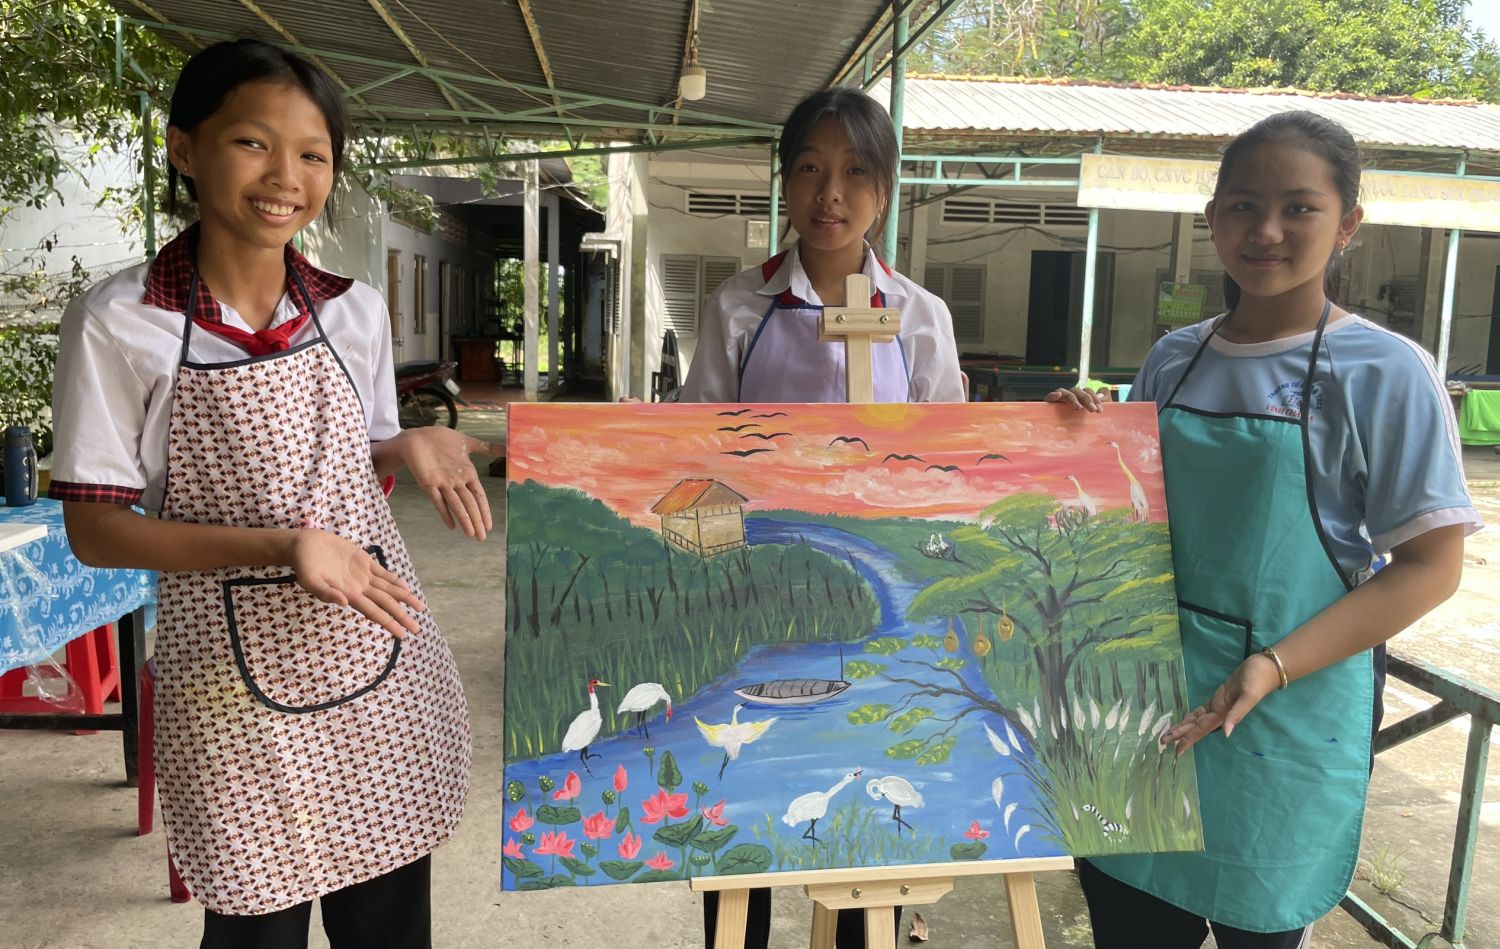 Three winners of the contest showed their canvas painting on wetlands ecosystems